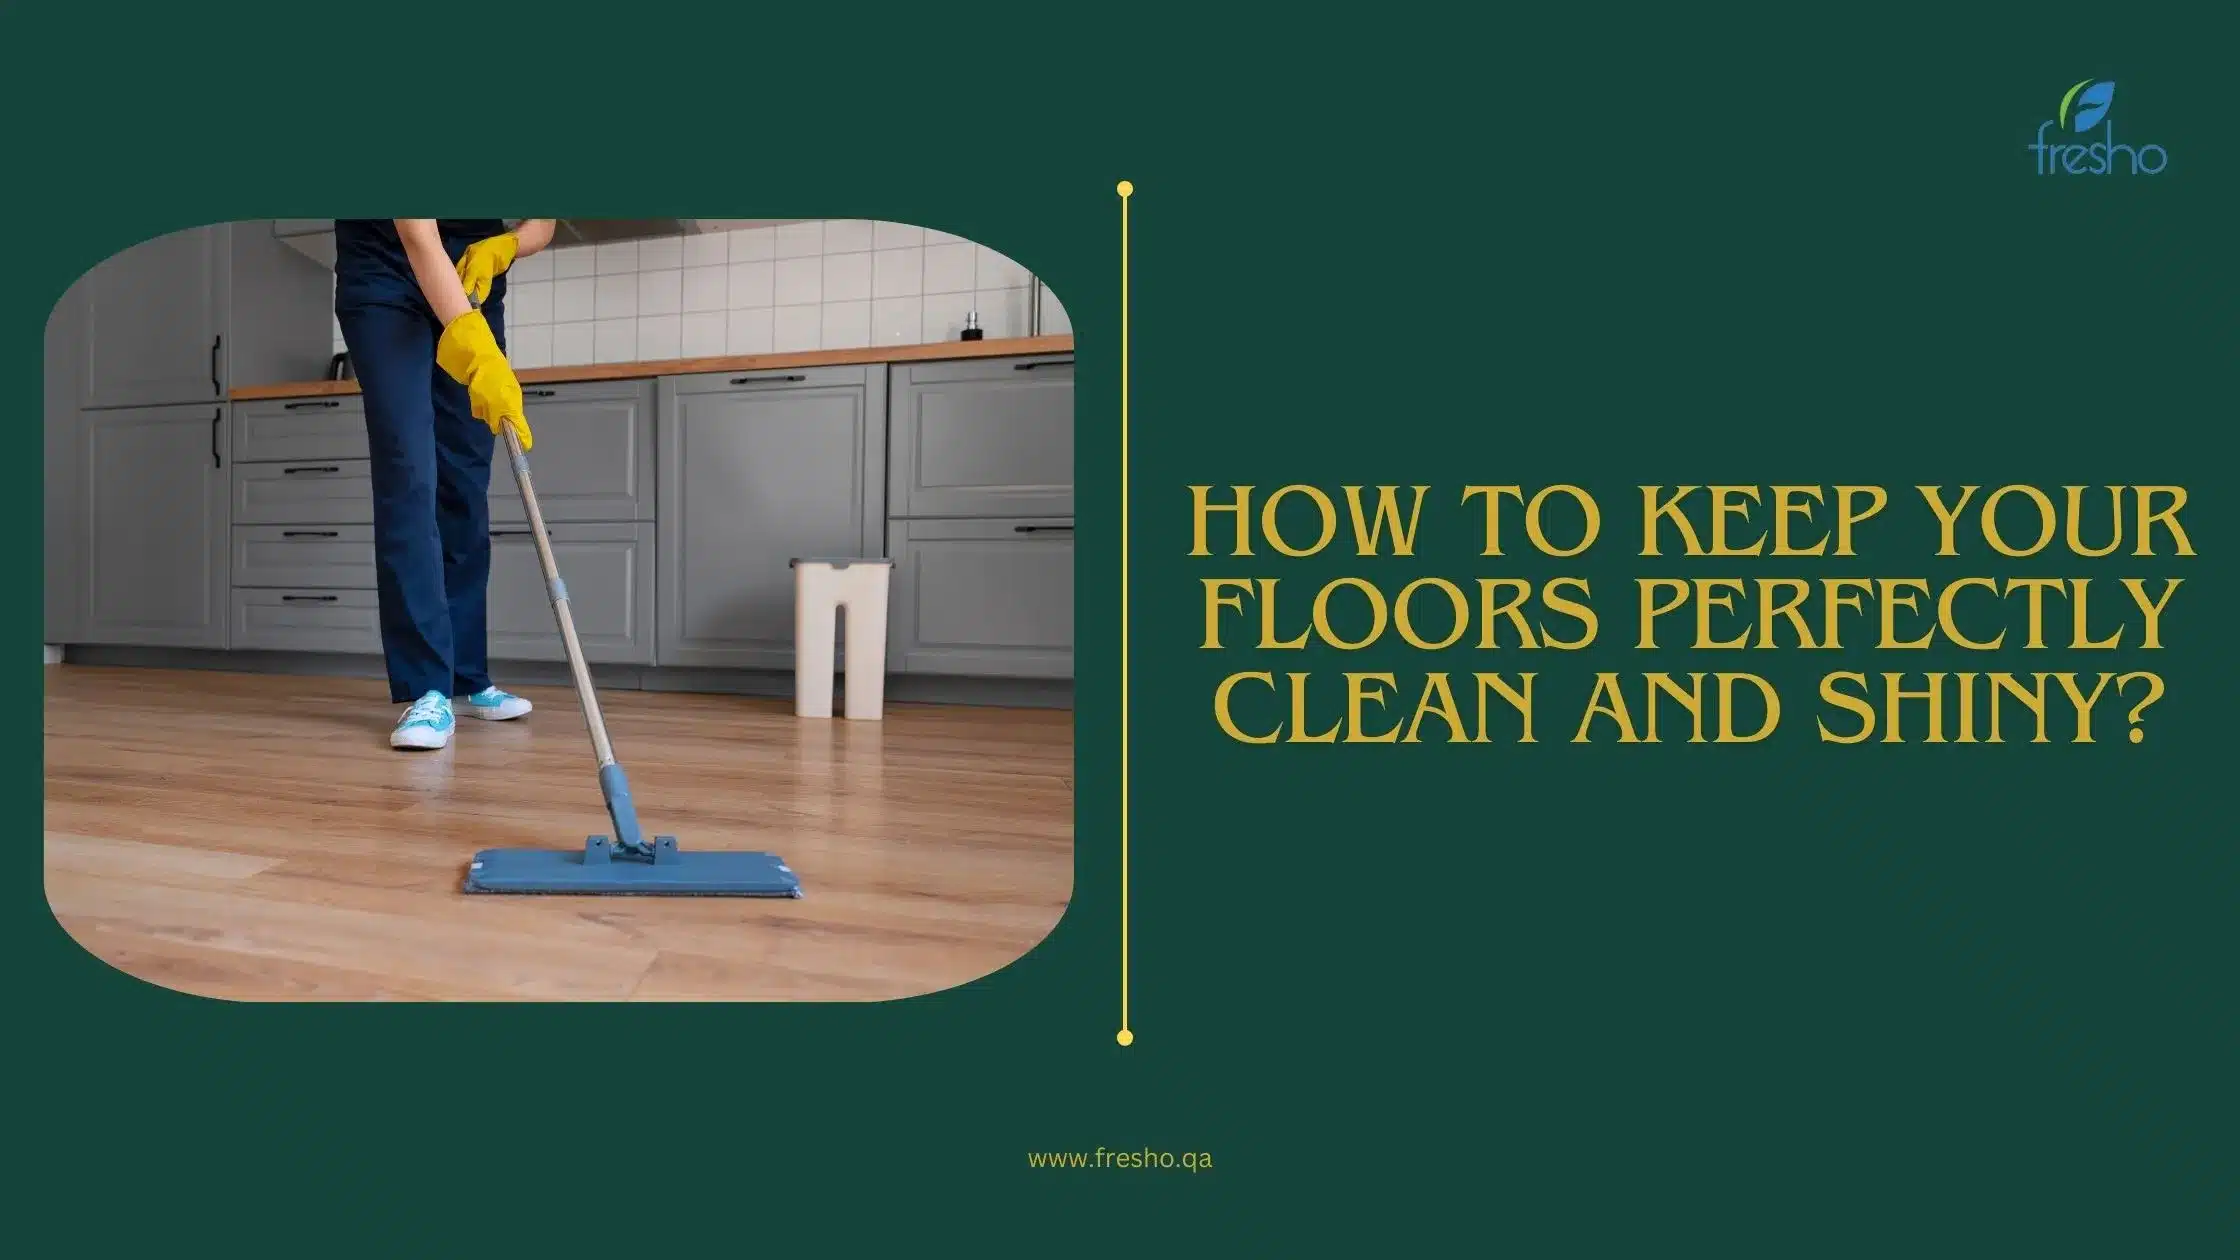 How to Keep Your Floors Perfectly Clean and Shiny?